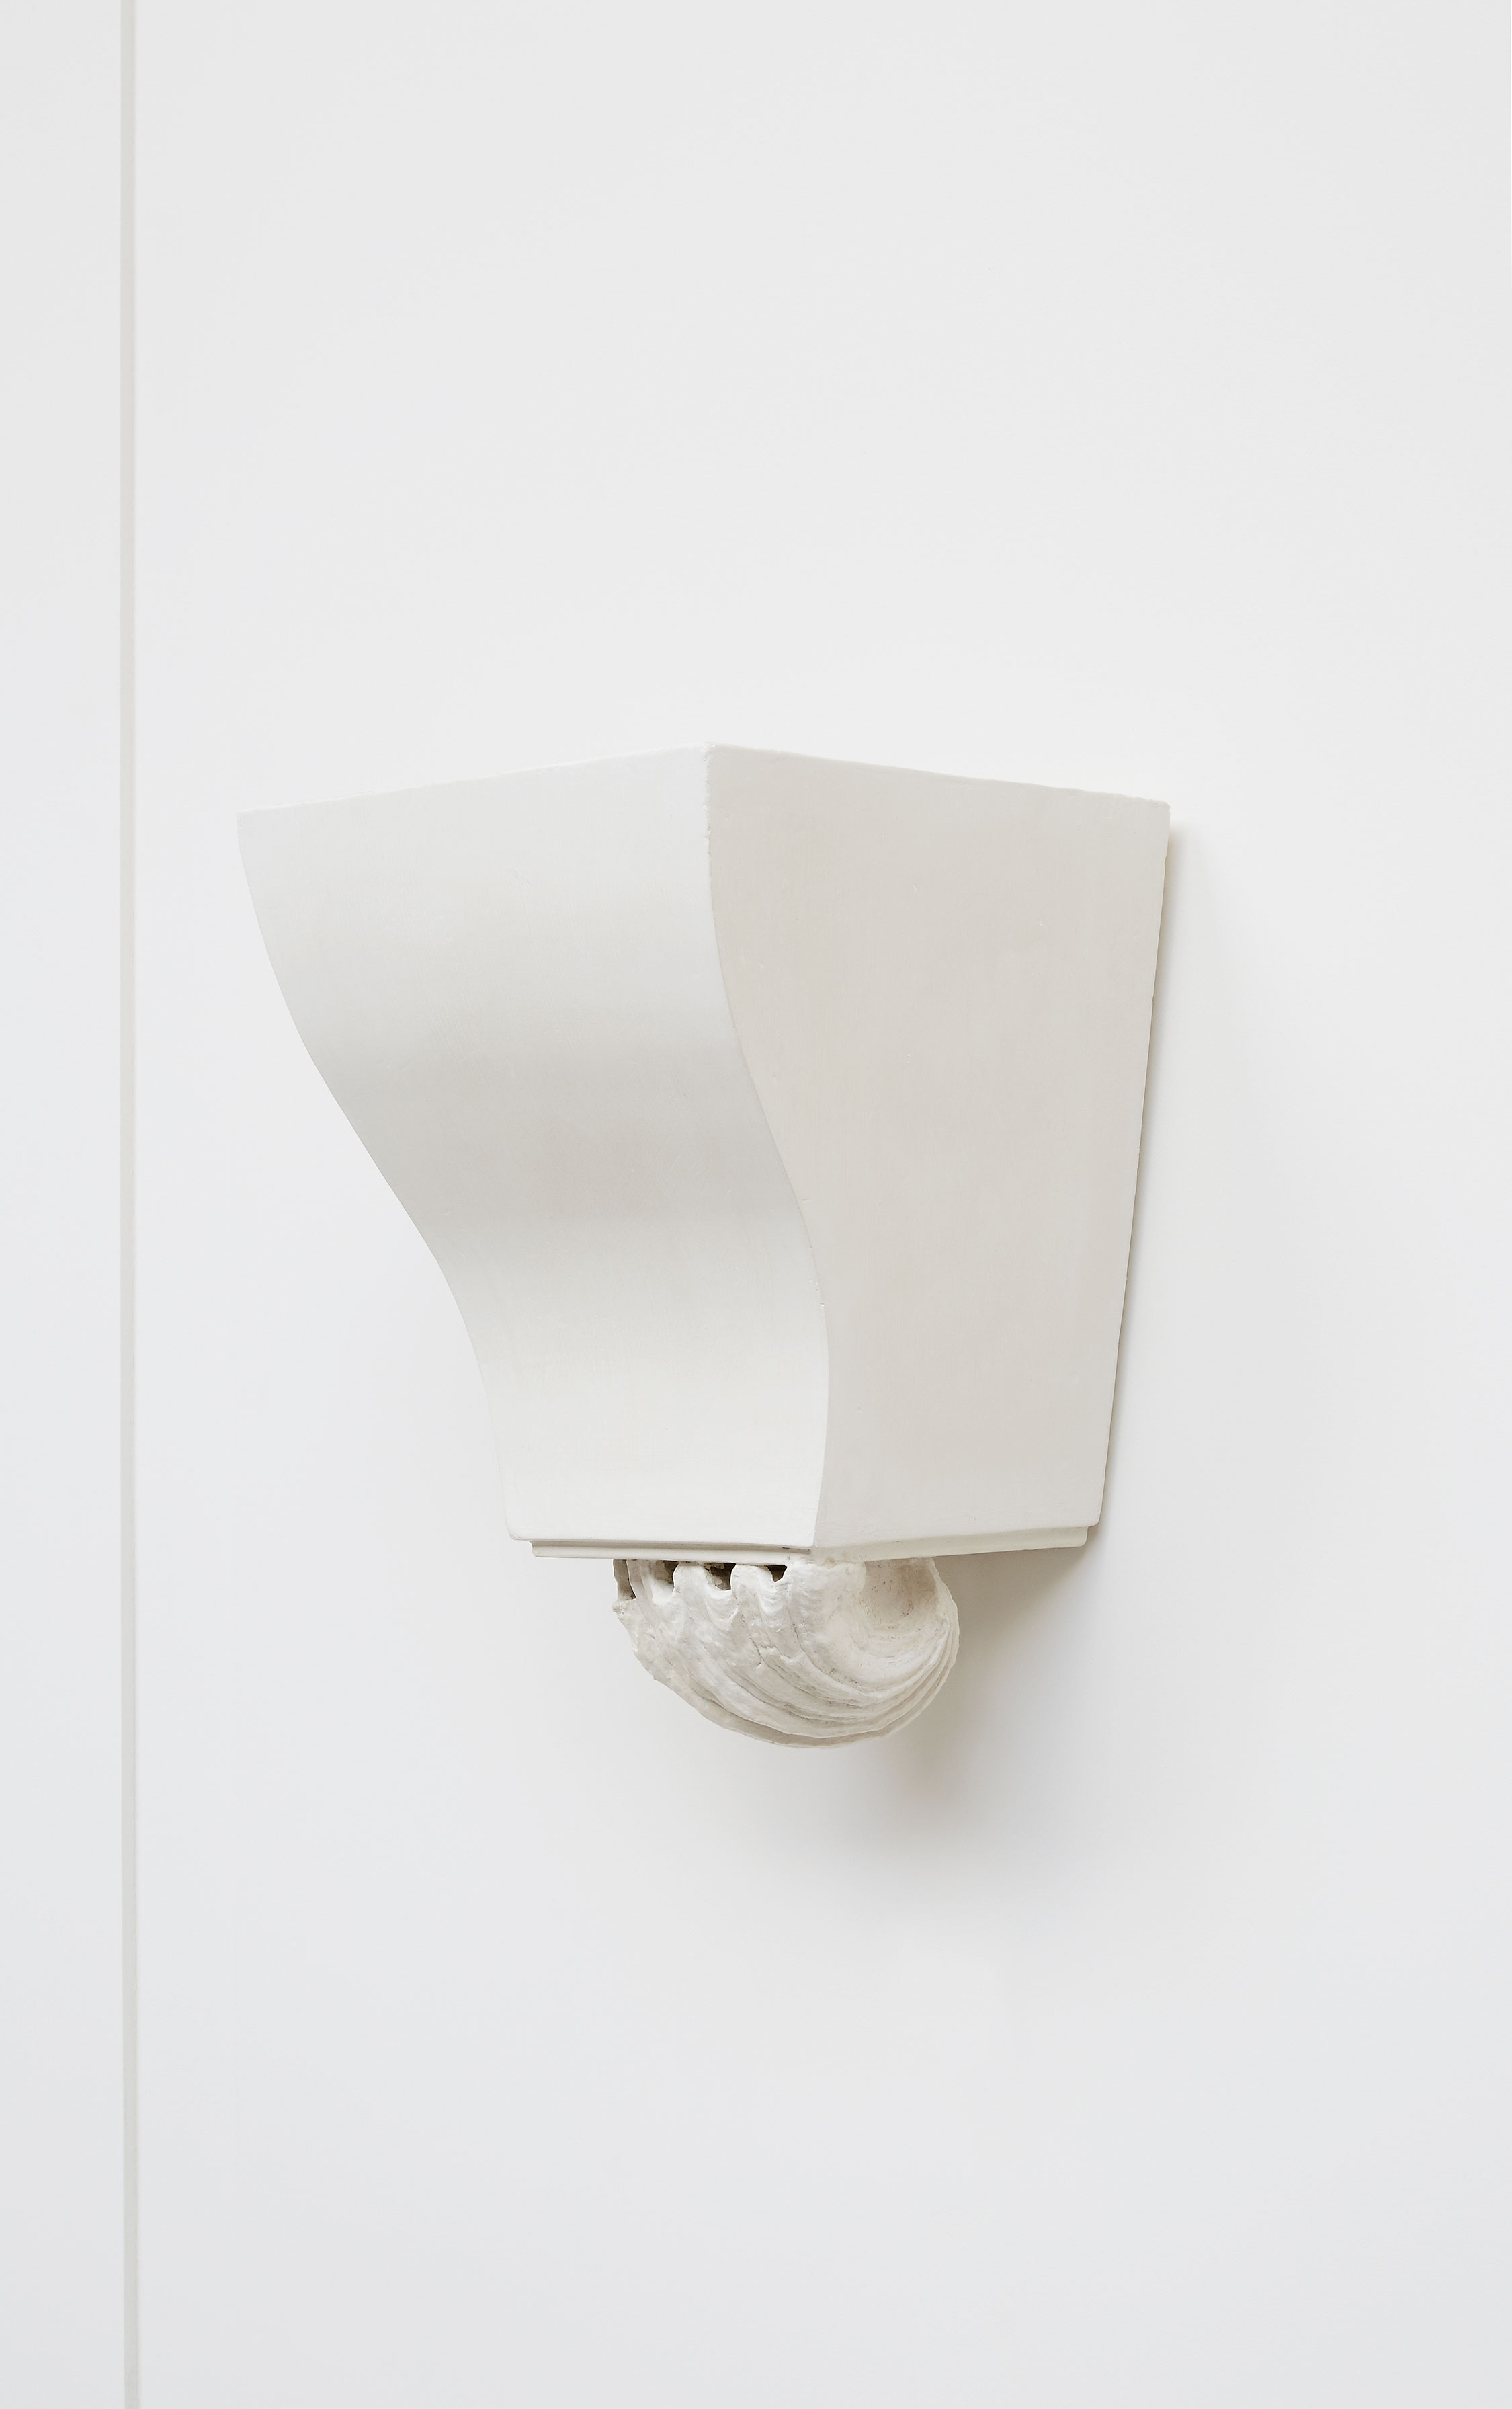 Jean-Charles Moreux, Four wall lamps, vue 03